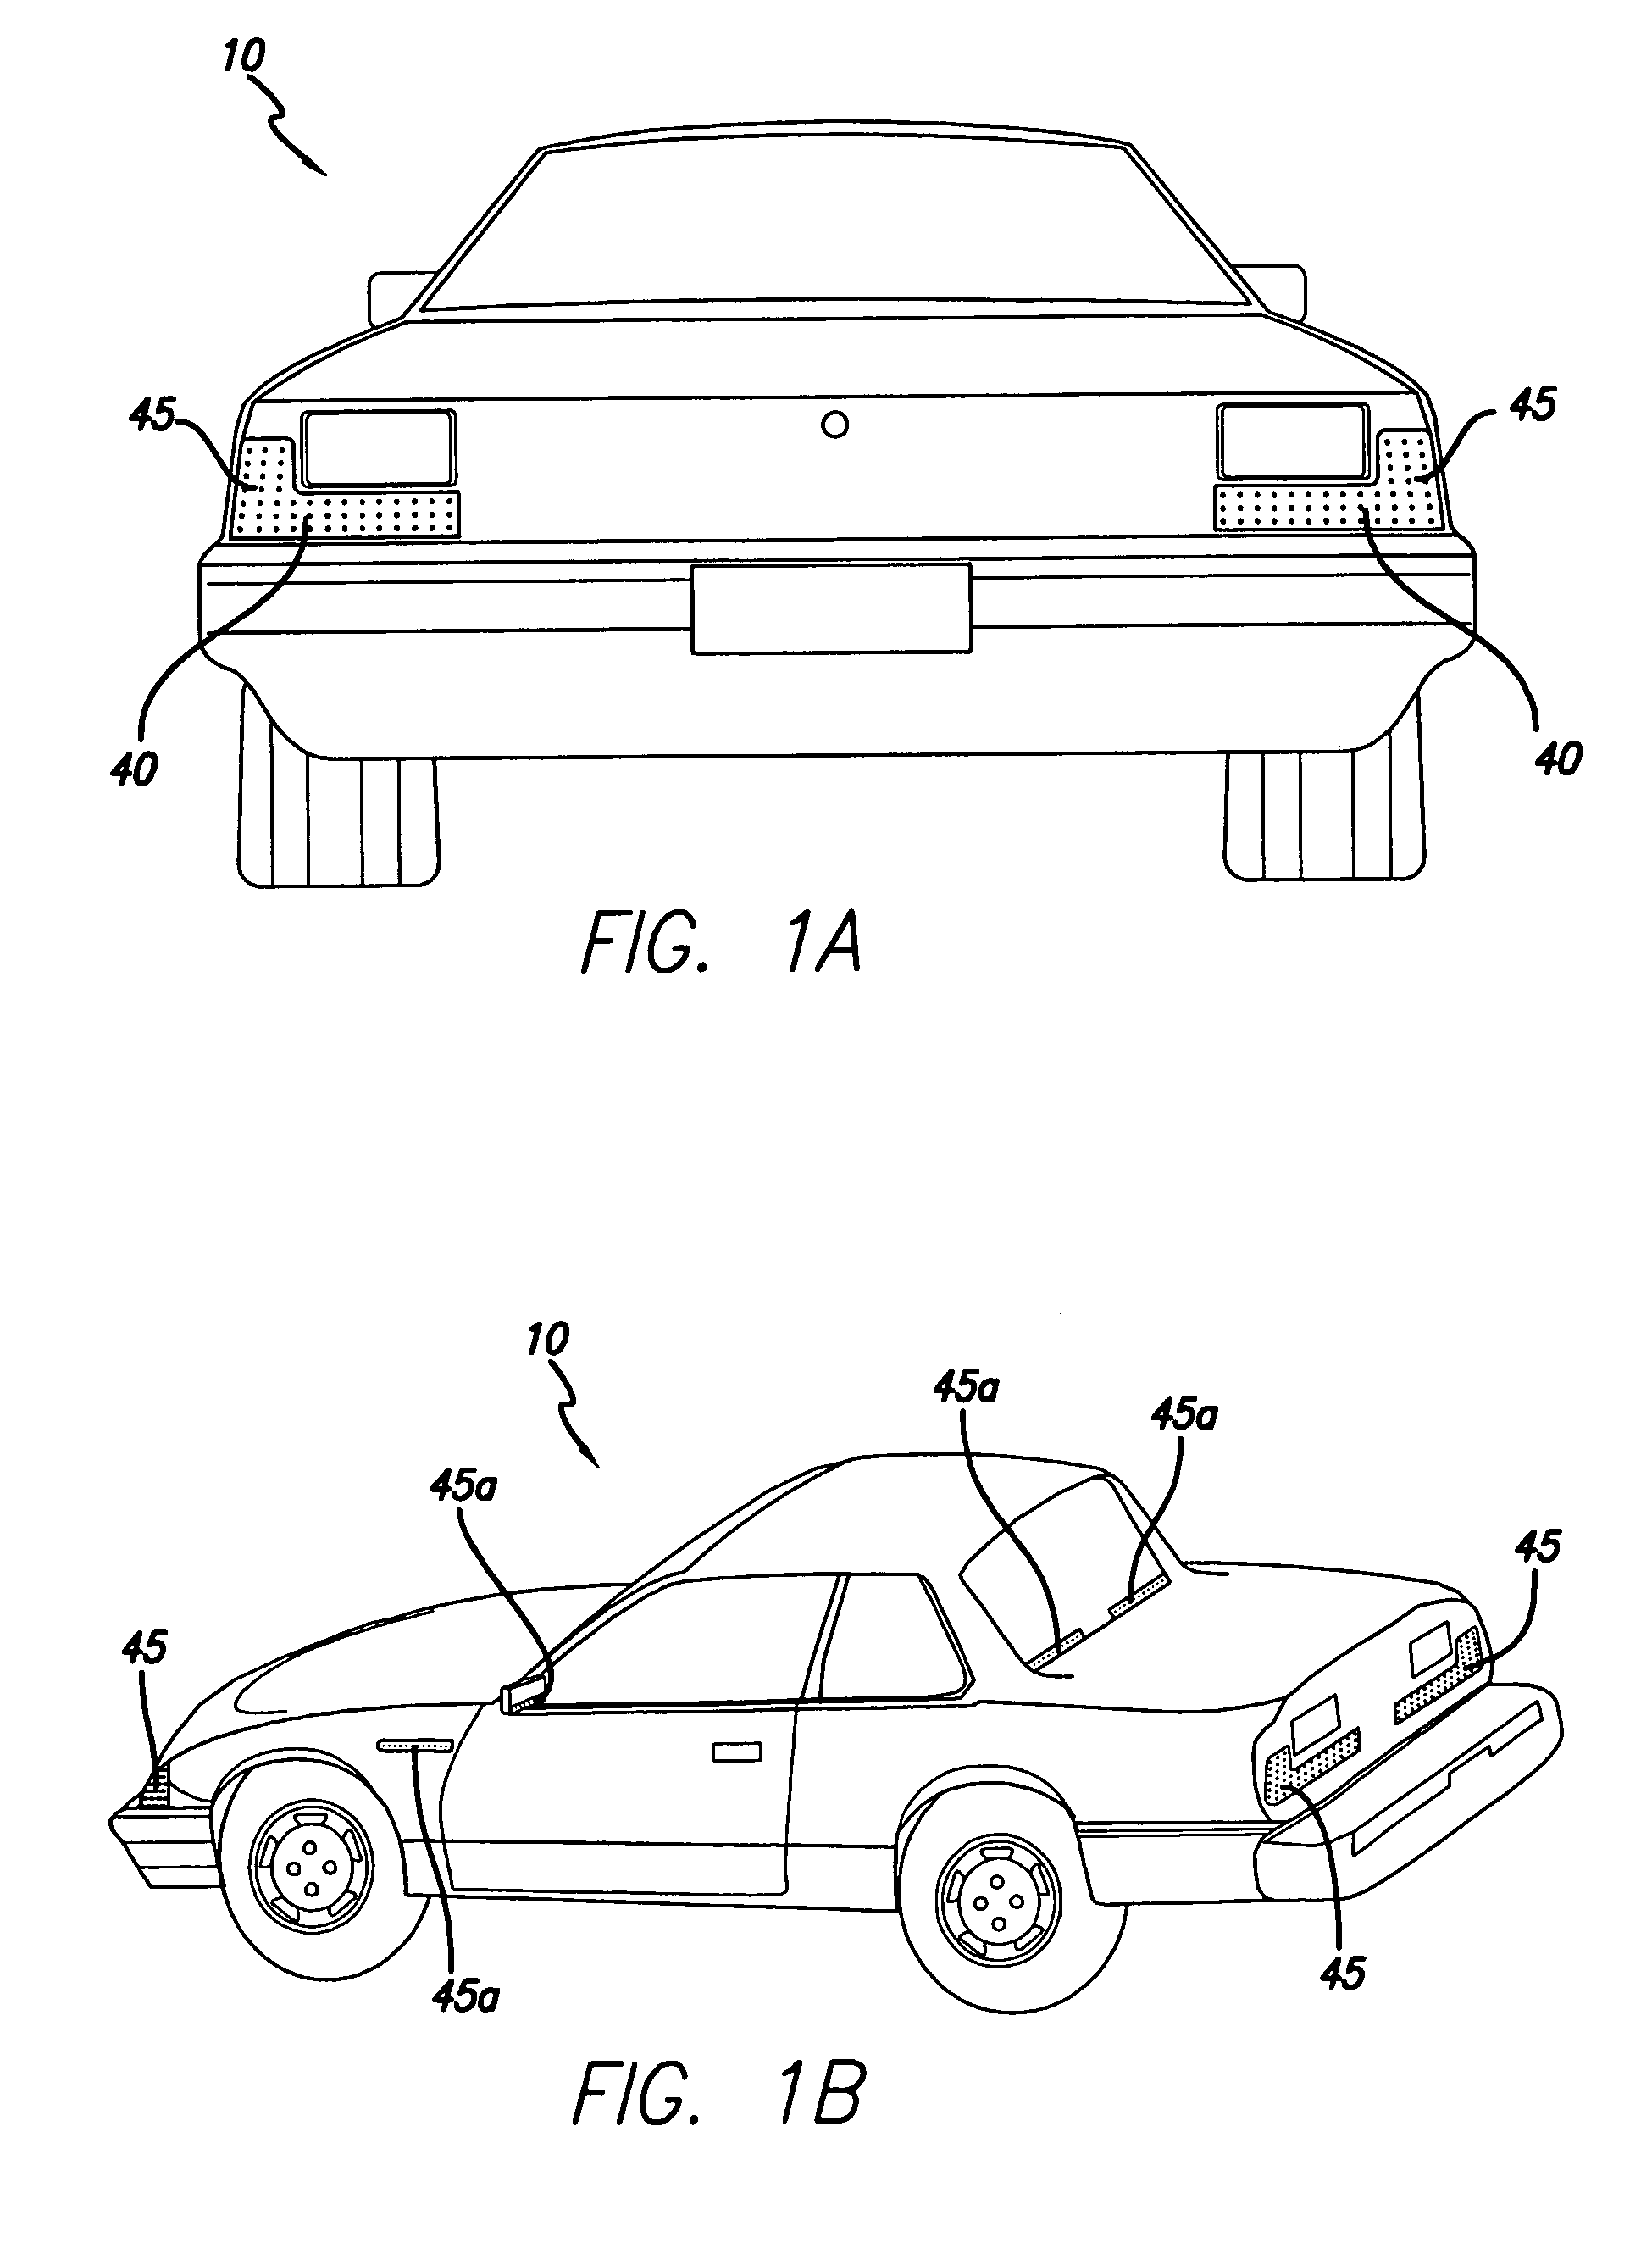 Dynamic vehicle signaling device and system